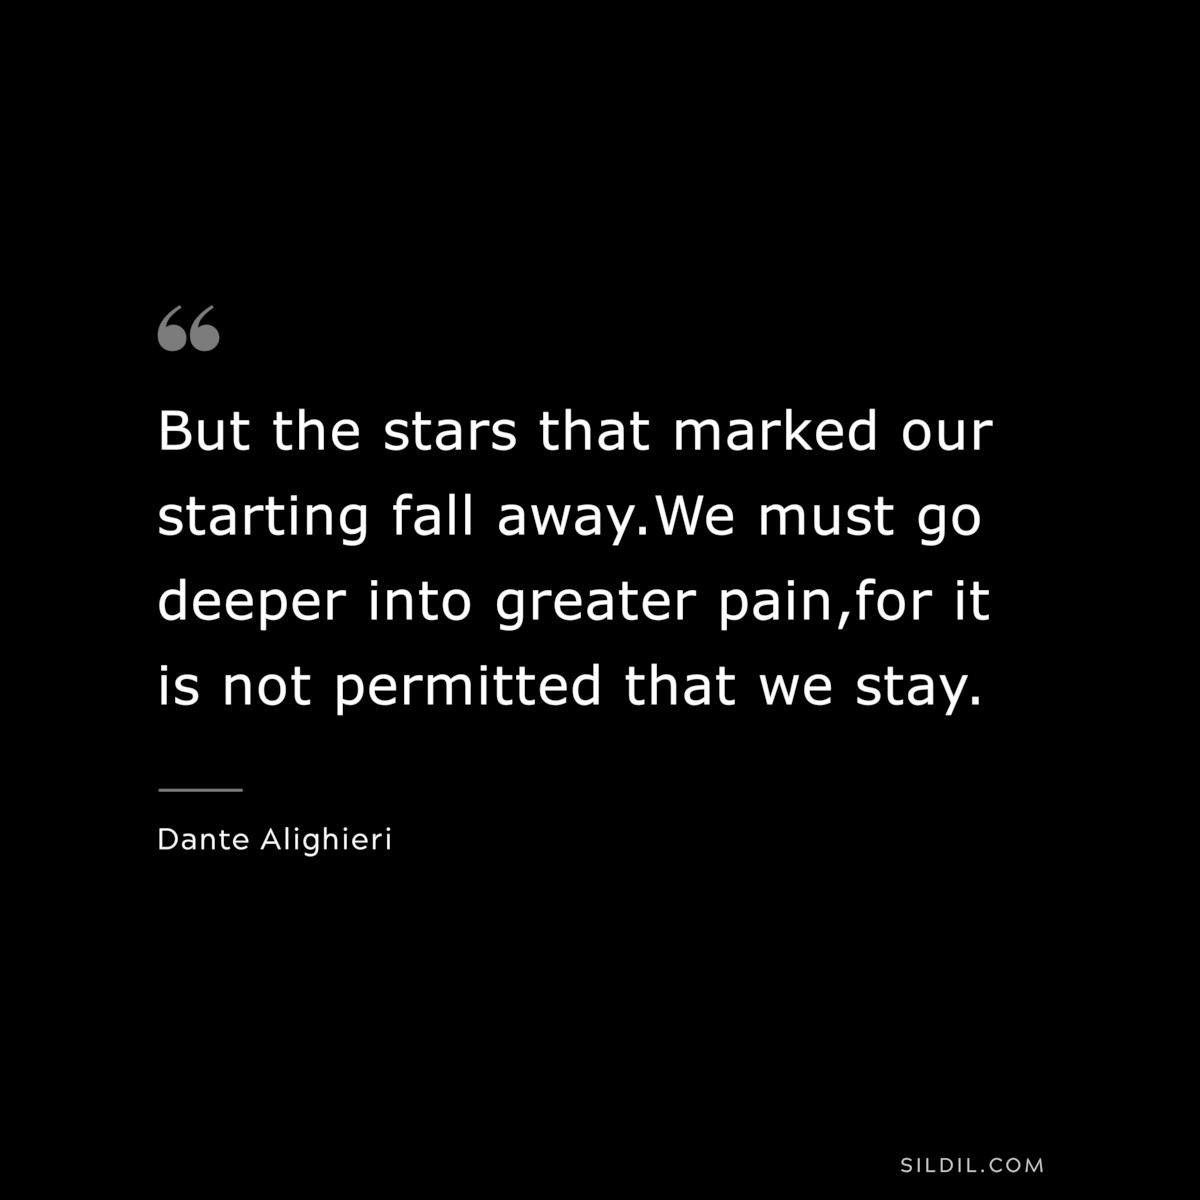 But the stars that marked our starting fall away.We must go deeper into greater pain,for it is not permitted that we stay. ― Dante Alighieri